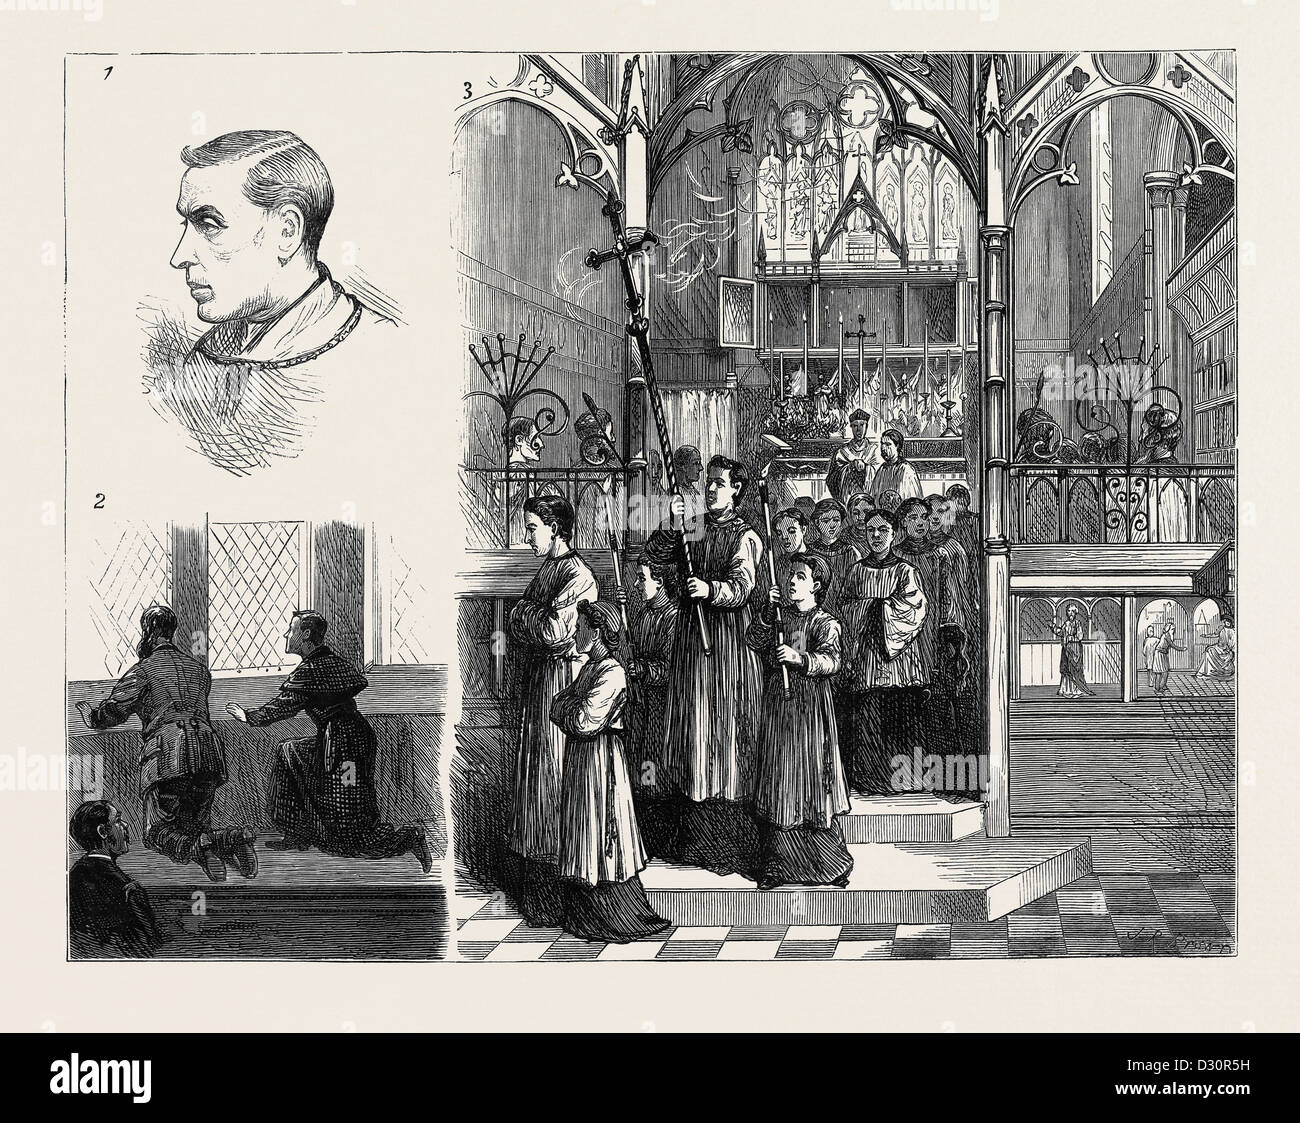 THE RITUALISTIC SERVICES AT HATCHAM: 1. Portrait of Rev. A. Tooth; 2. Besieged in the Vestry; 3. The Procession from the Altar Stock Photo